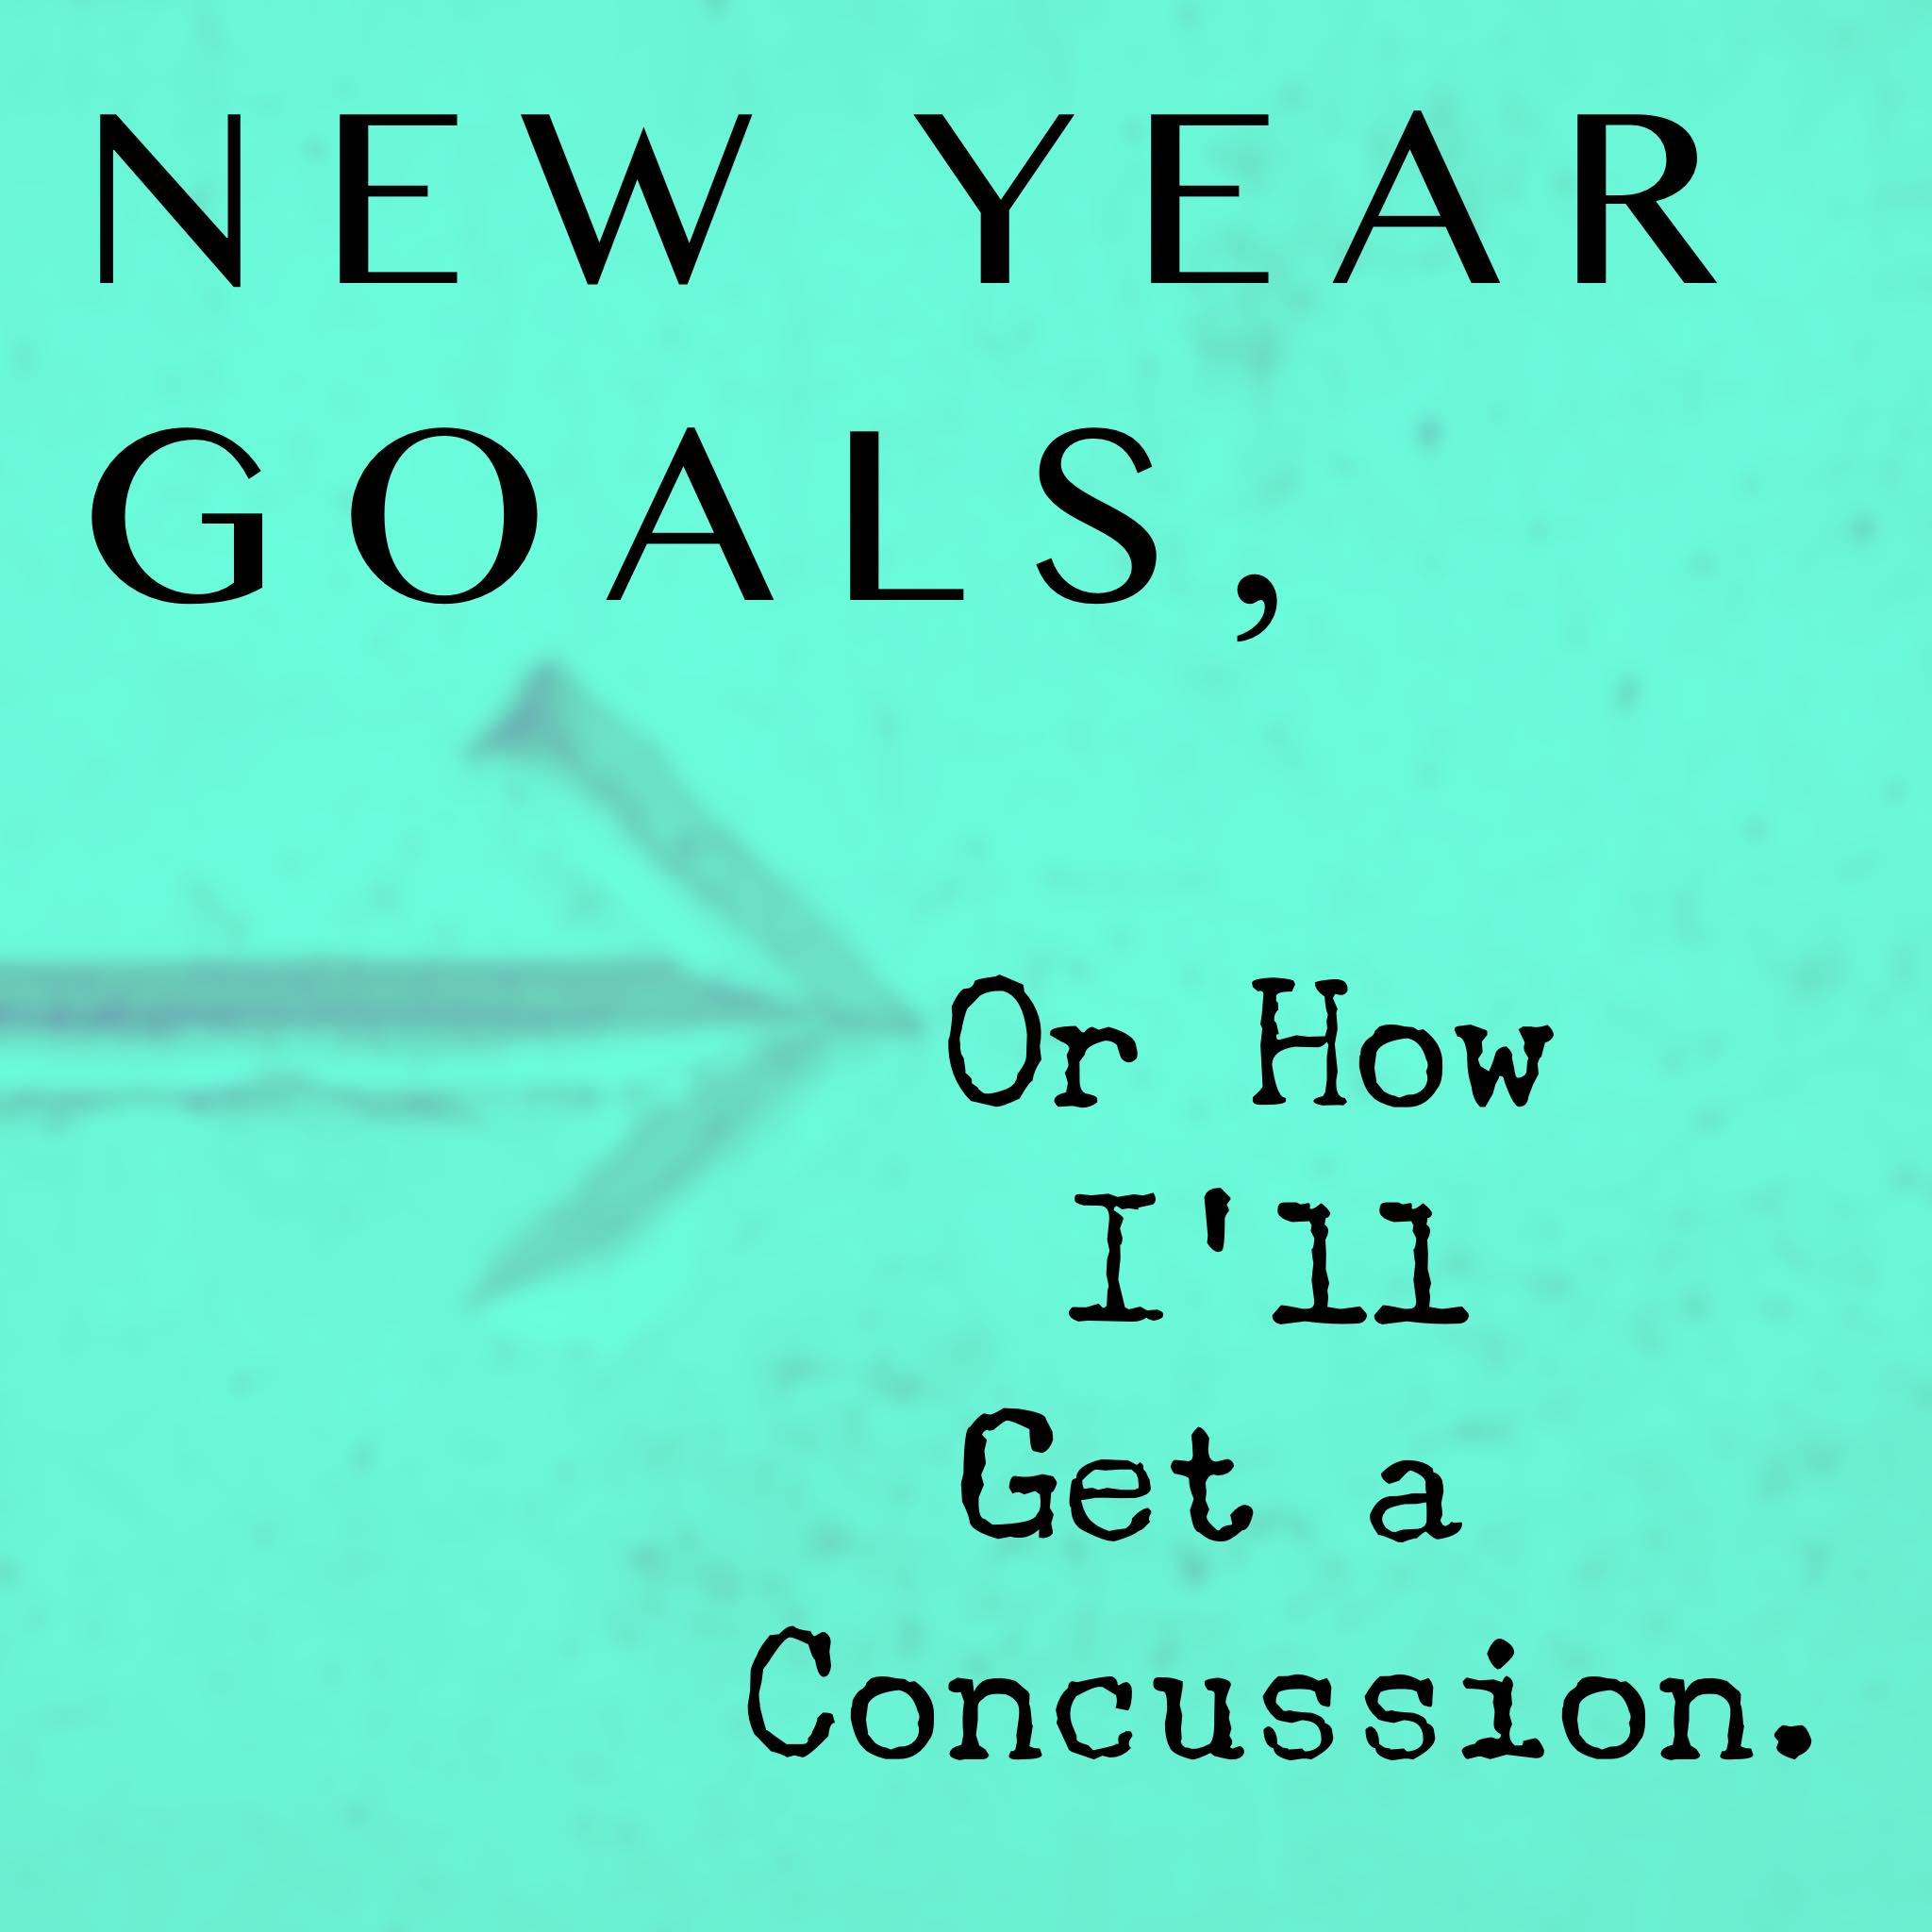 New Year Goals, Or How I’ll Get a Concussion